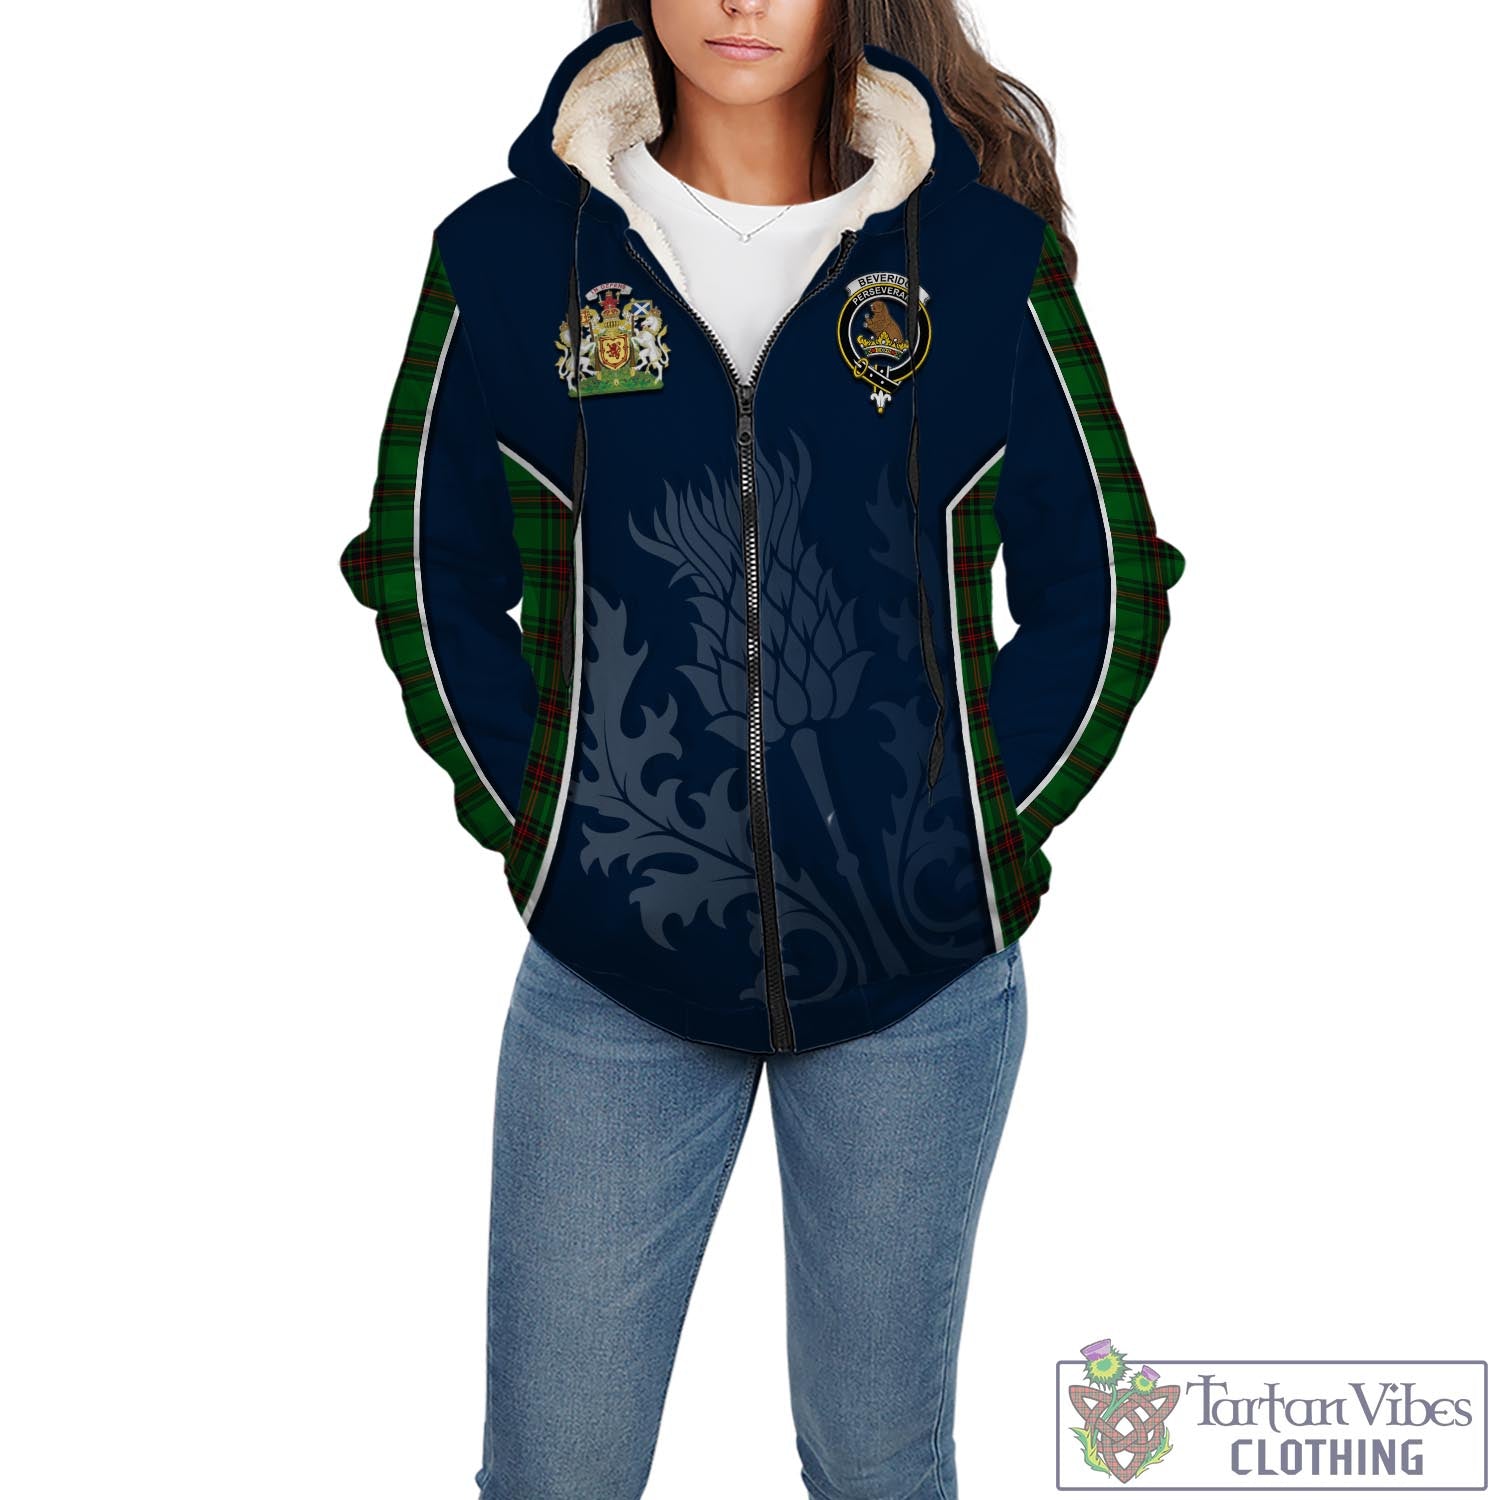 Tartan Vibes Clothing Beveridge Tartan Sherpa Hoodie with Family Crest and Scottish Thistle Vibes Sport Style